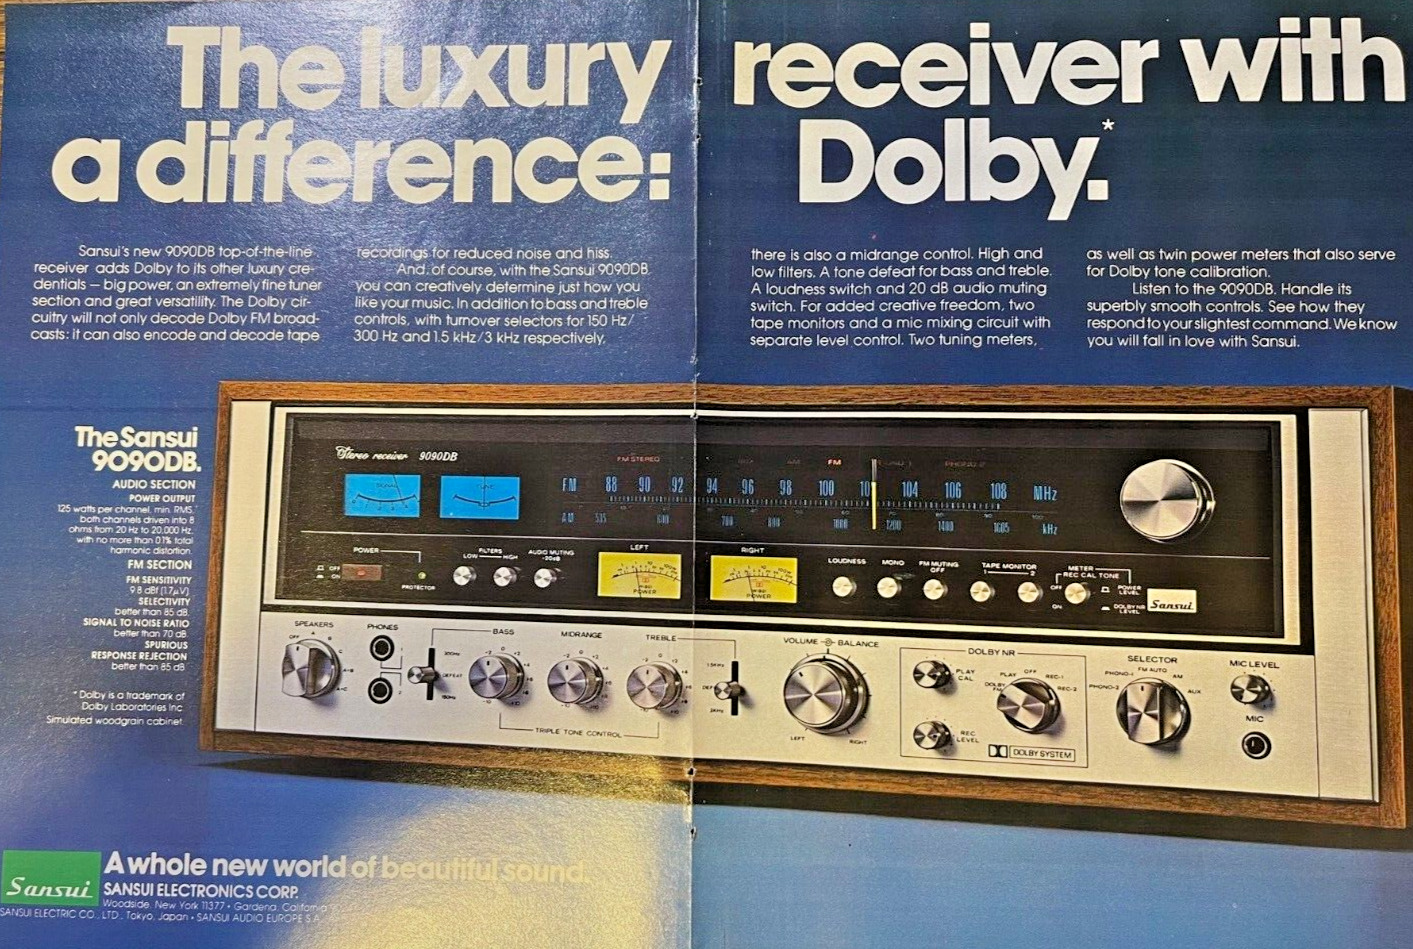 1978 Vintage Magazine Advertisement SANSUI Stereo Receiver With Dolby